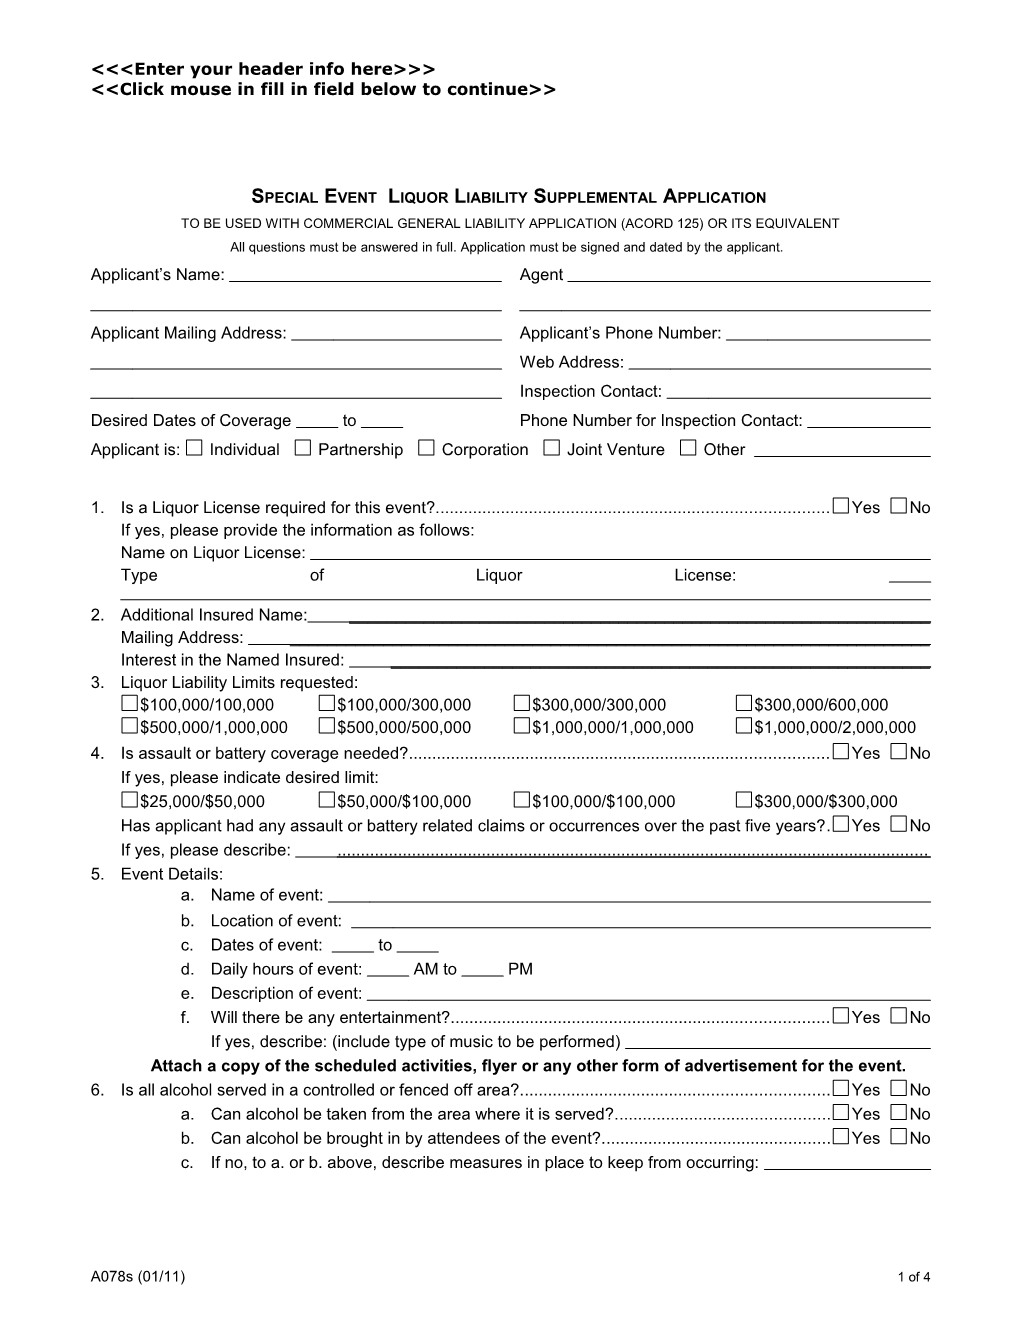 Commercial General Liability Application s1